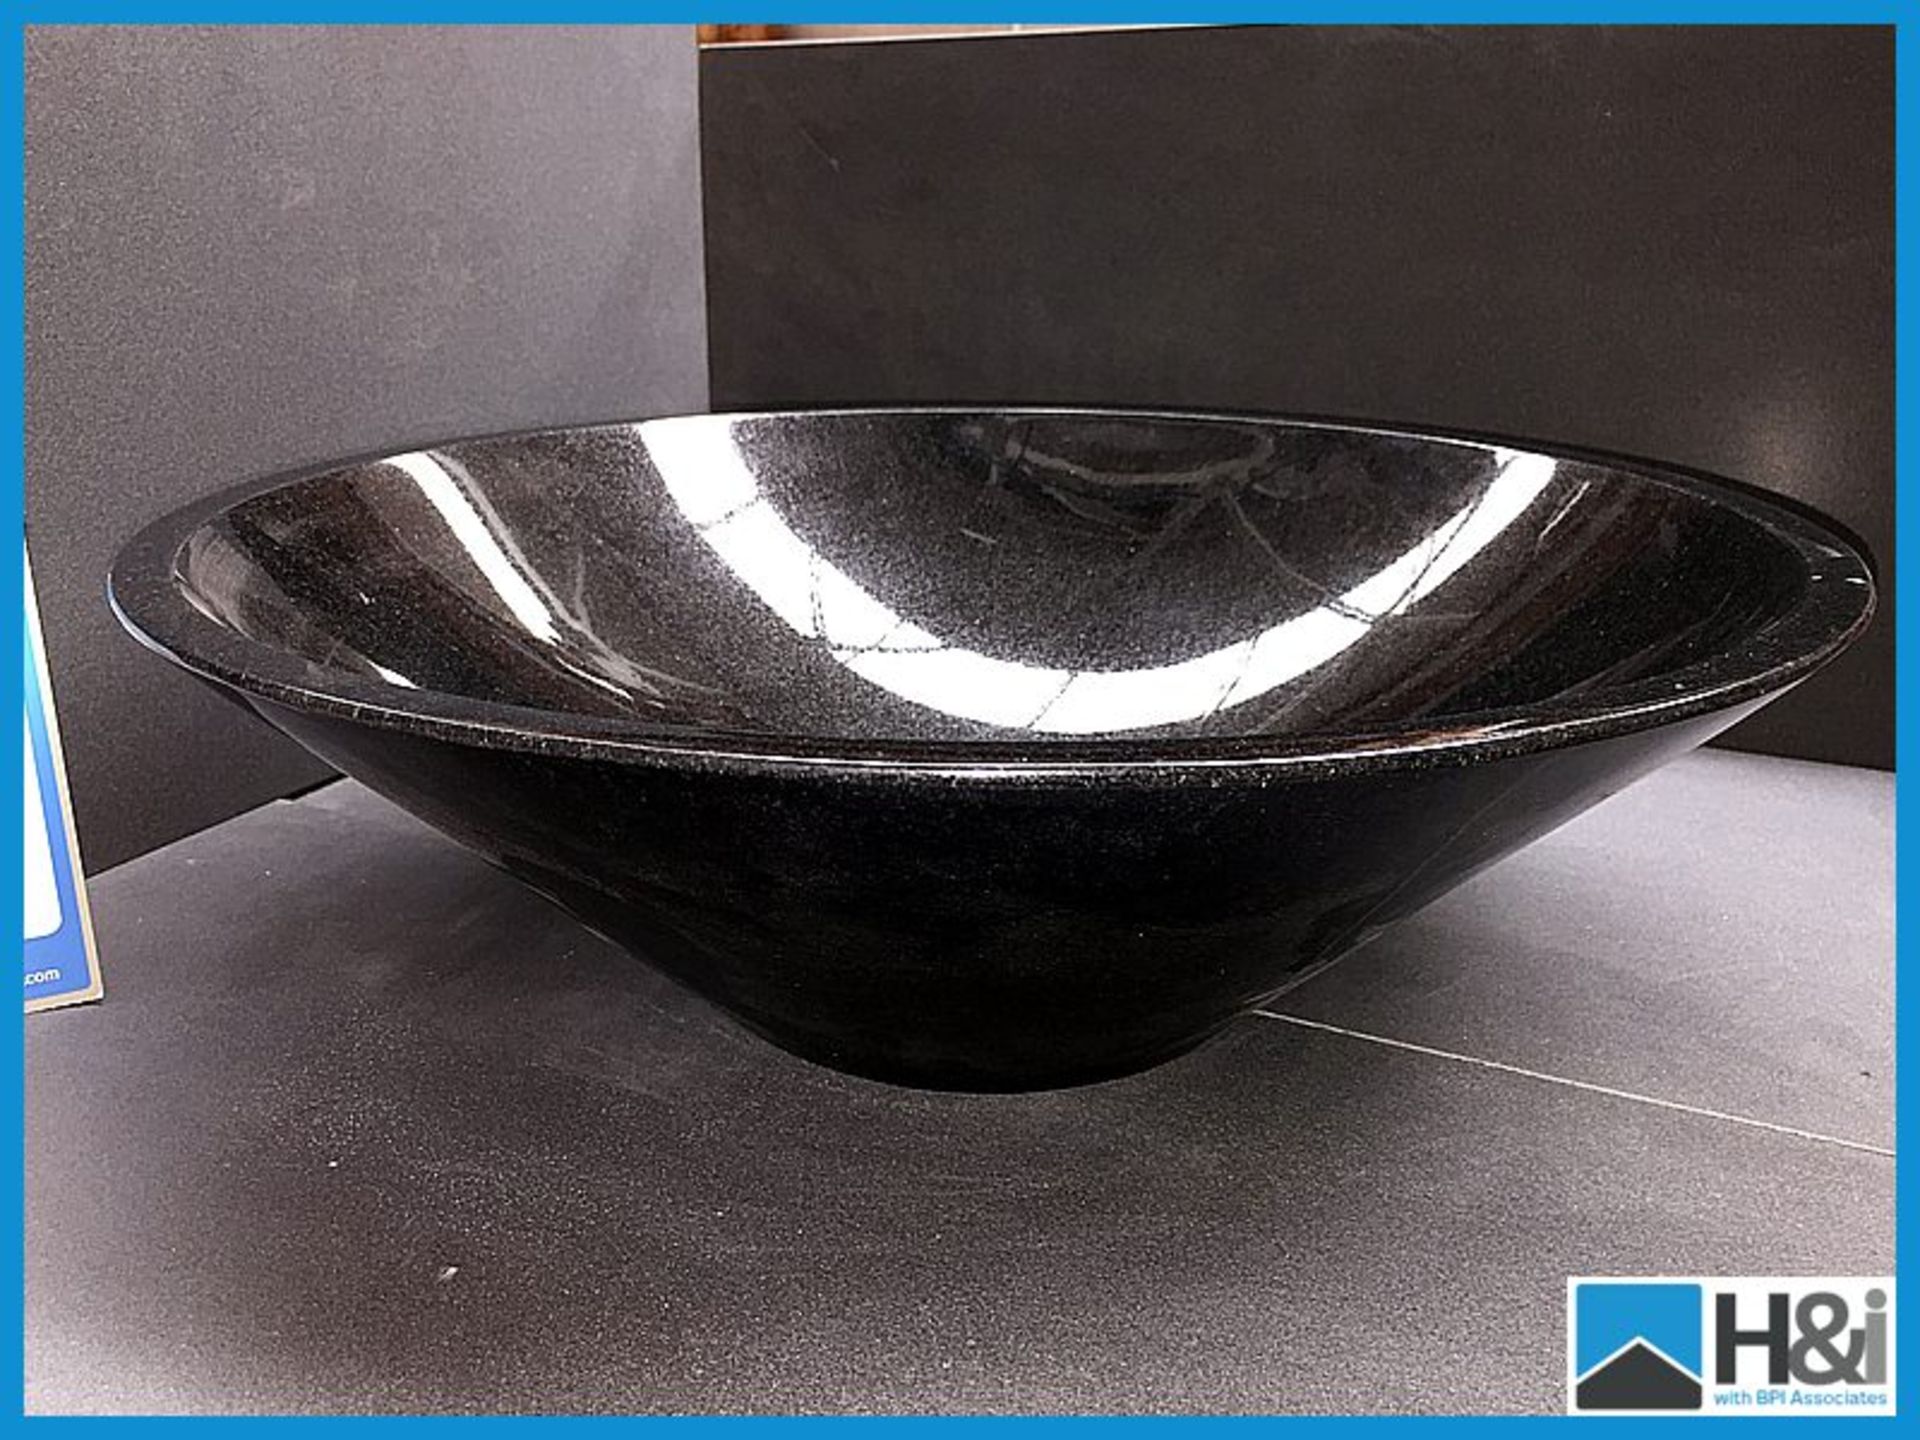 Absolute black polished granite Torro large basin. 430 x 140 x 20 thick wall Appraisal: Good - Image 3 of 3